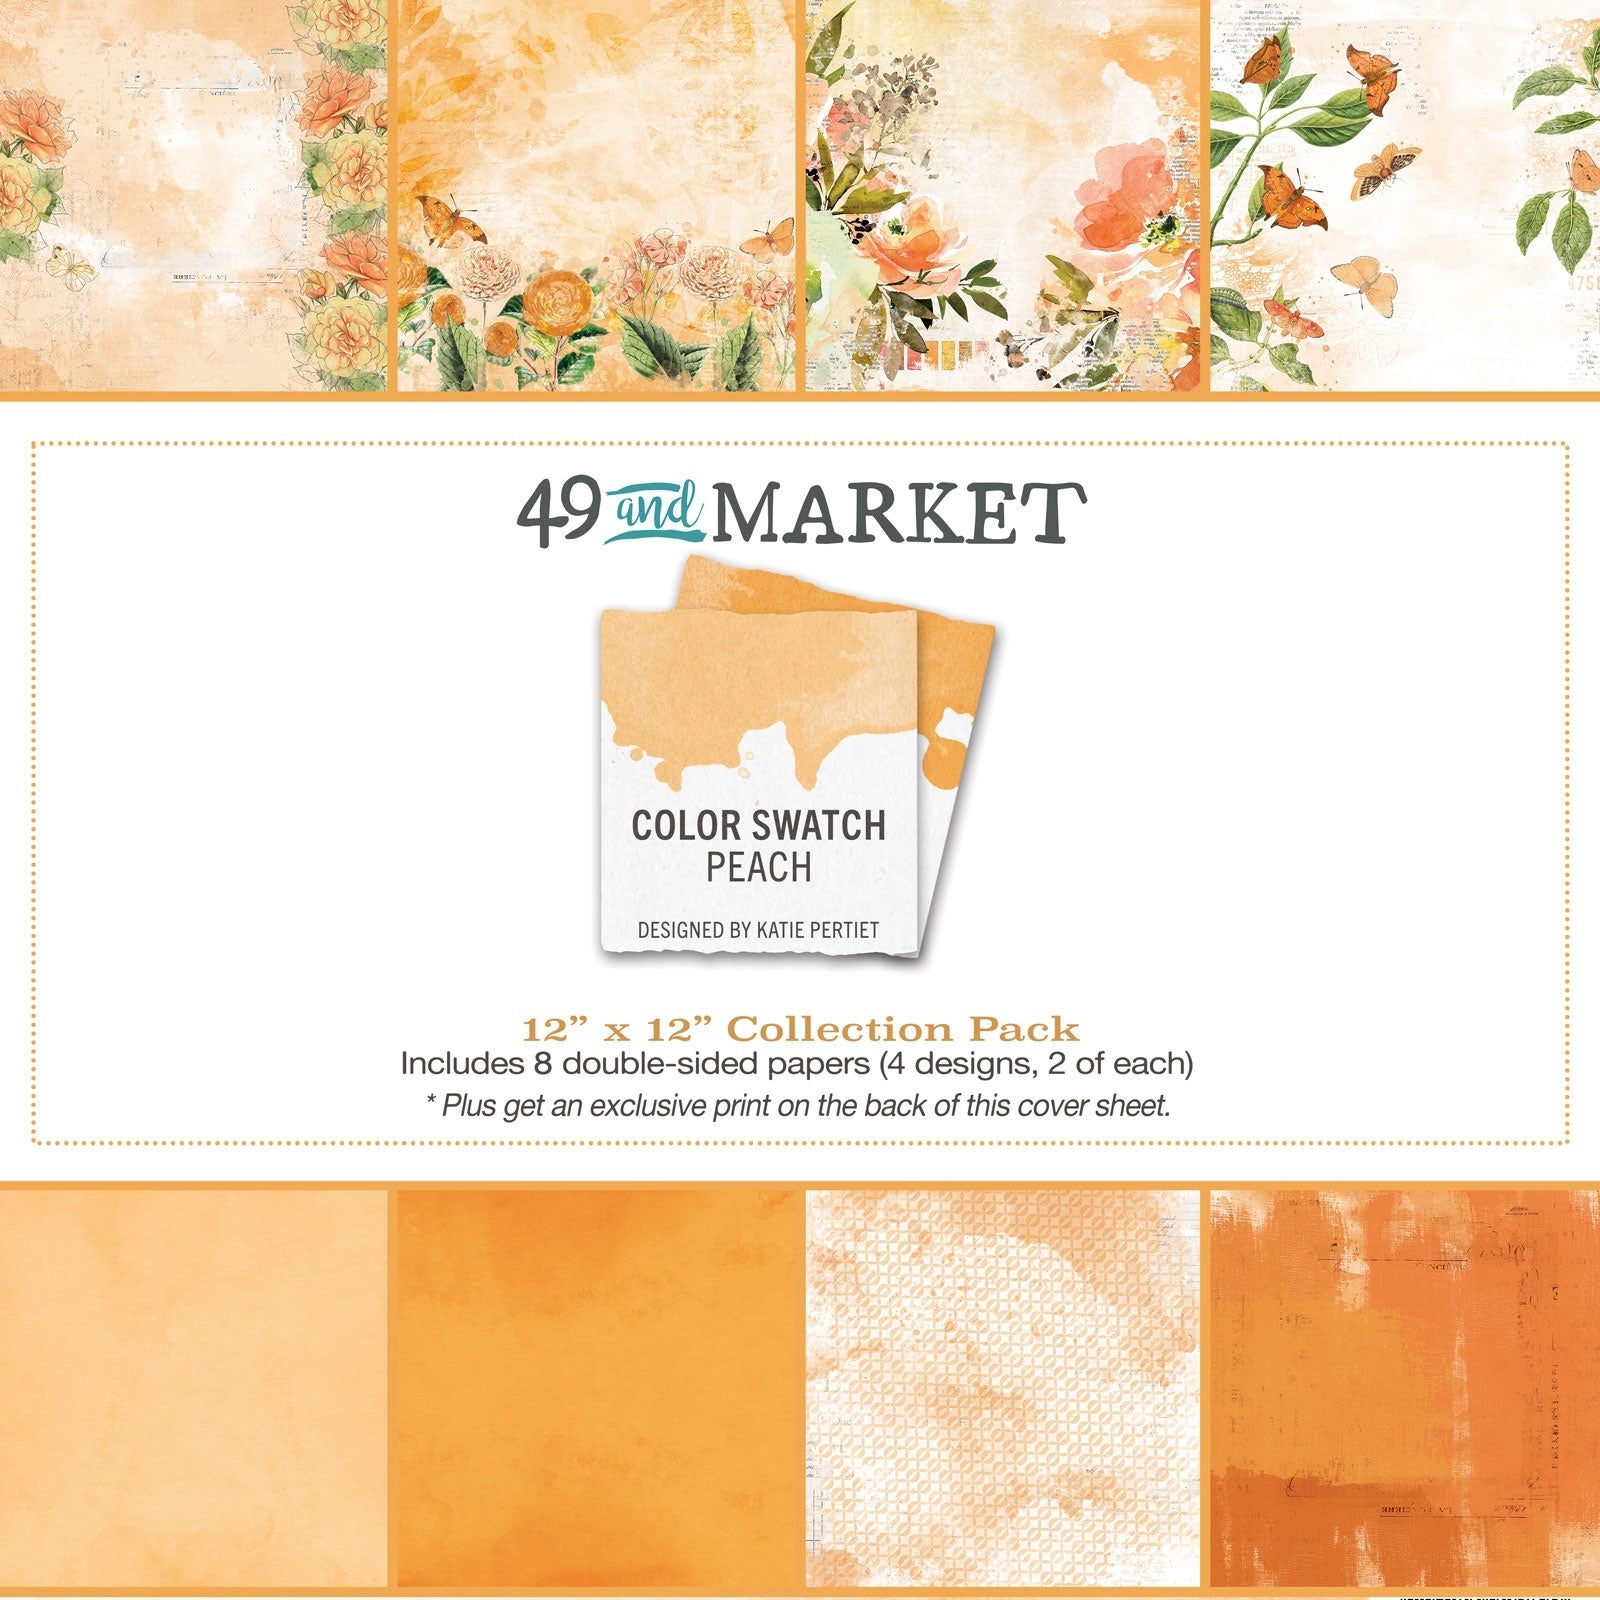 49 and Market 12 x 12 Collection  Pack   -  Color Swatch  Peach